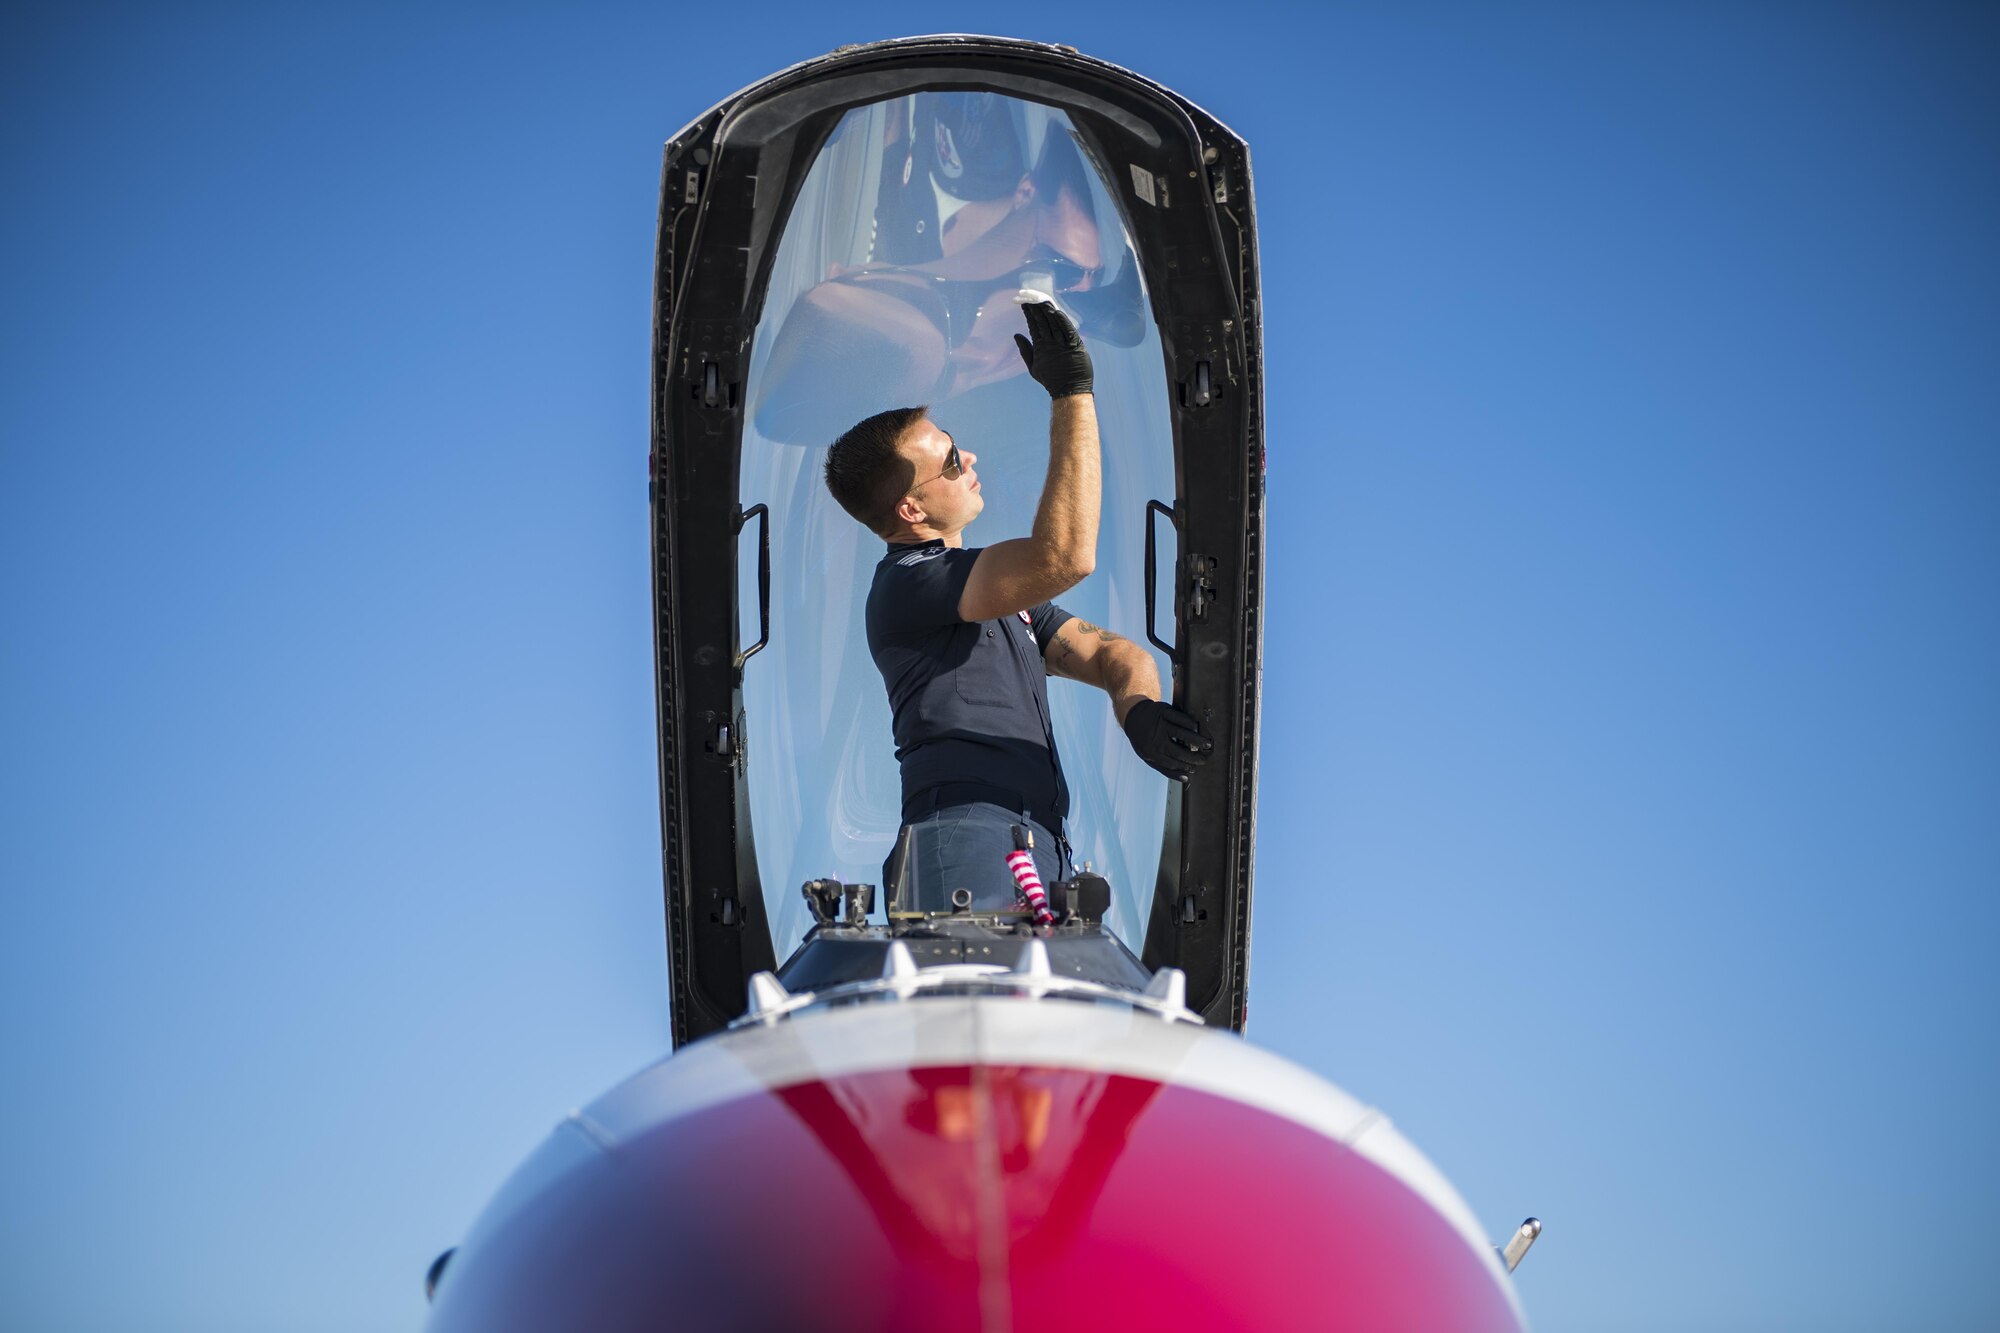 Staff Sgt. Kyle Smith, U.S. Air Force Thunderbird No. 3 assistant dedicated crew chief, cleans condensation off a F-16D Fighting Falcon canopy, Oct. 27, 2017, at Moody Air Force Base, Ga. The Thunderbirds, based out of Nellis Air Force Base, Nev., are the Air Force’s premier aerial demonstration team, performing at air shows and special events worldwide. (U.S. Air Force photo by Senior Airman Janiqua P. Robinson)